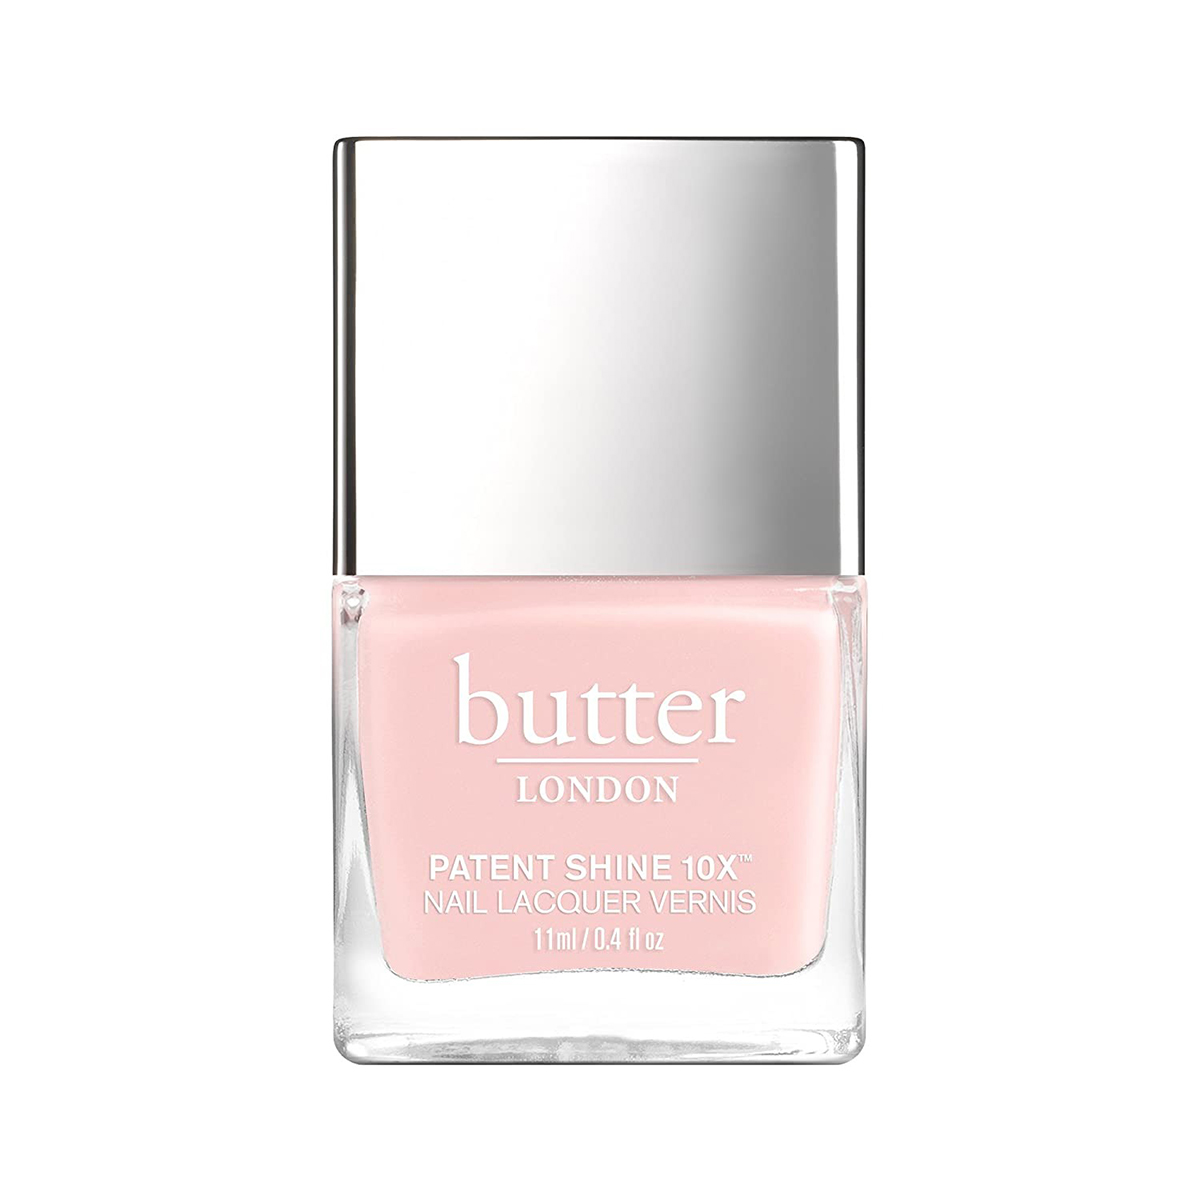 Butter London Nail Polish in Piece of Cake